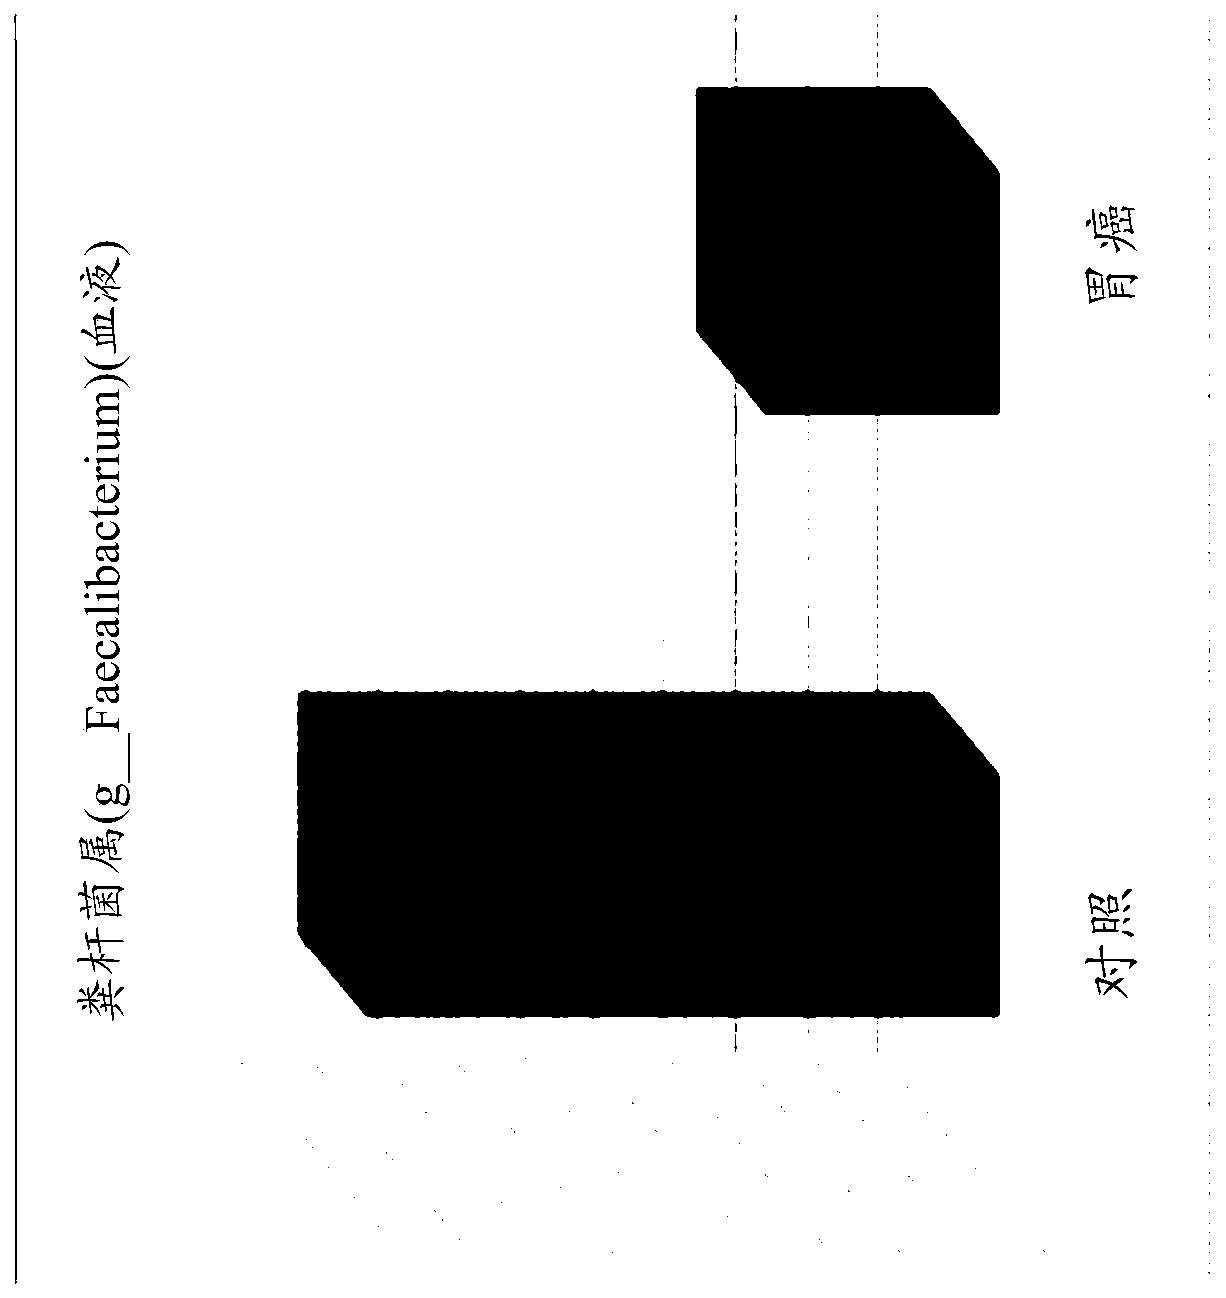 Nanovesicles derived from faecalibacterium prausnitzii, and uses thereof